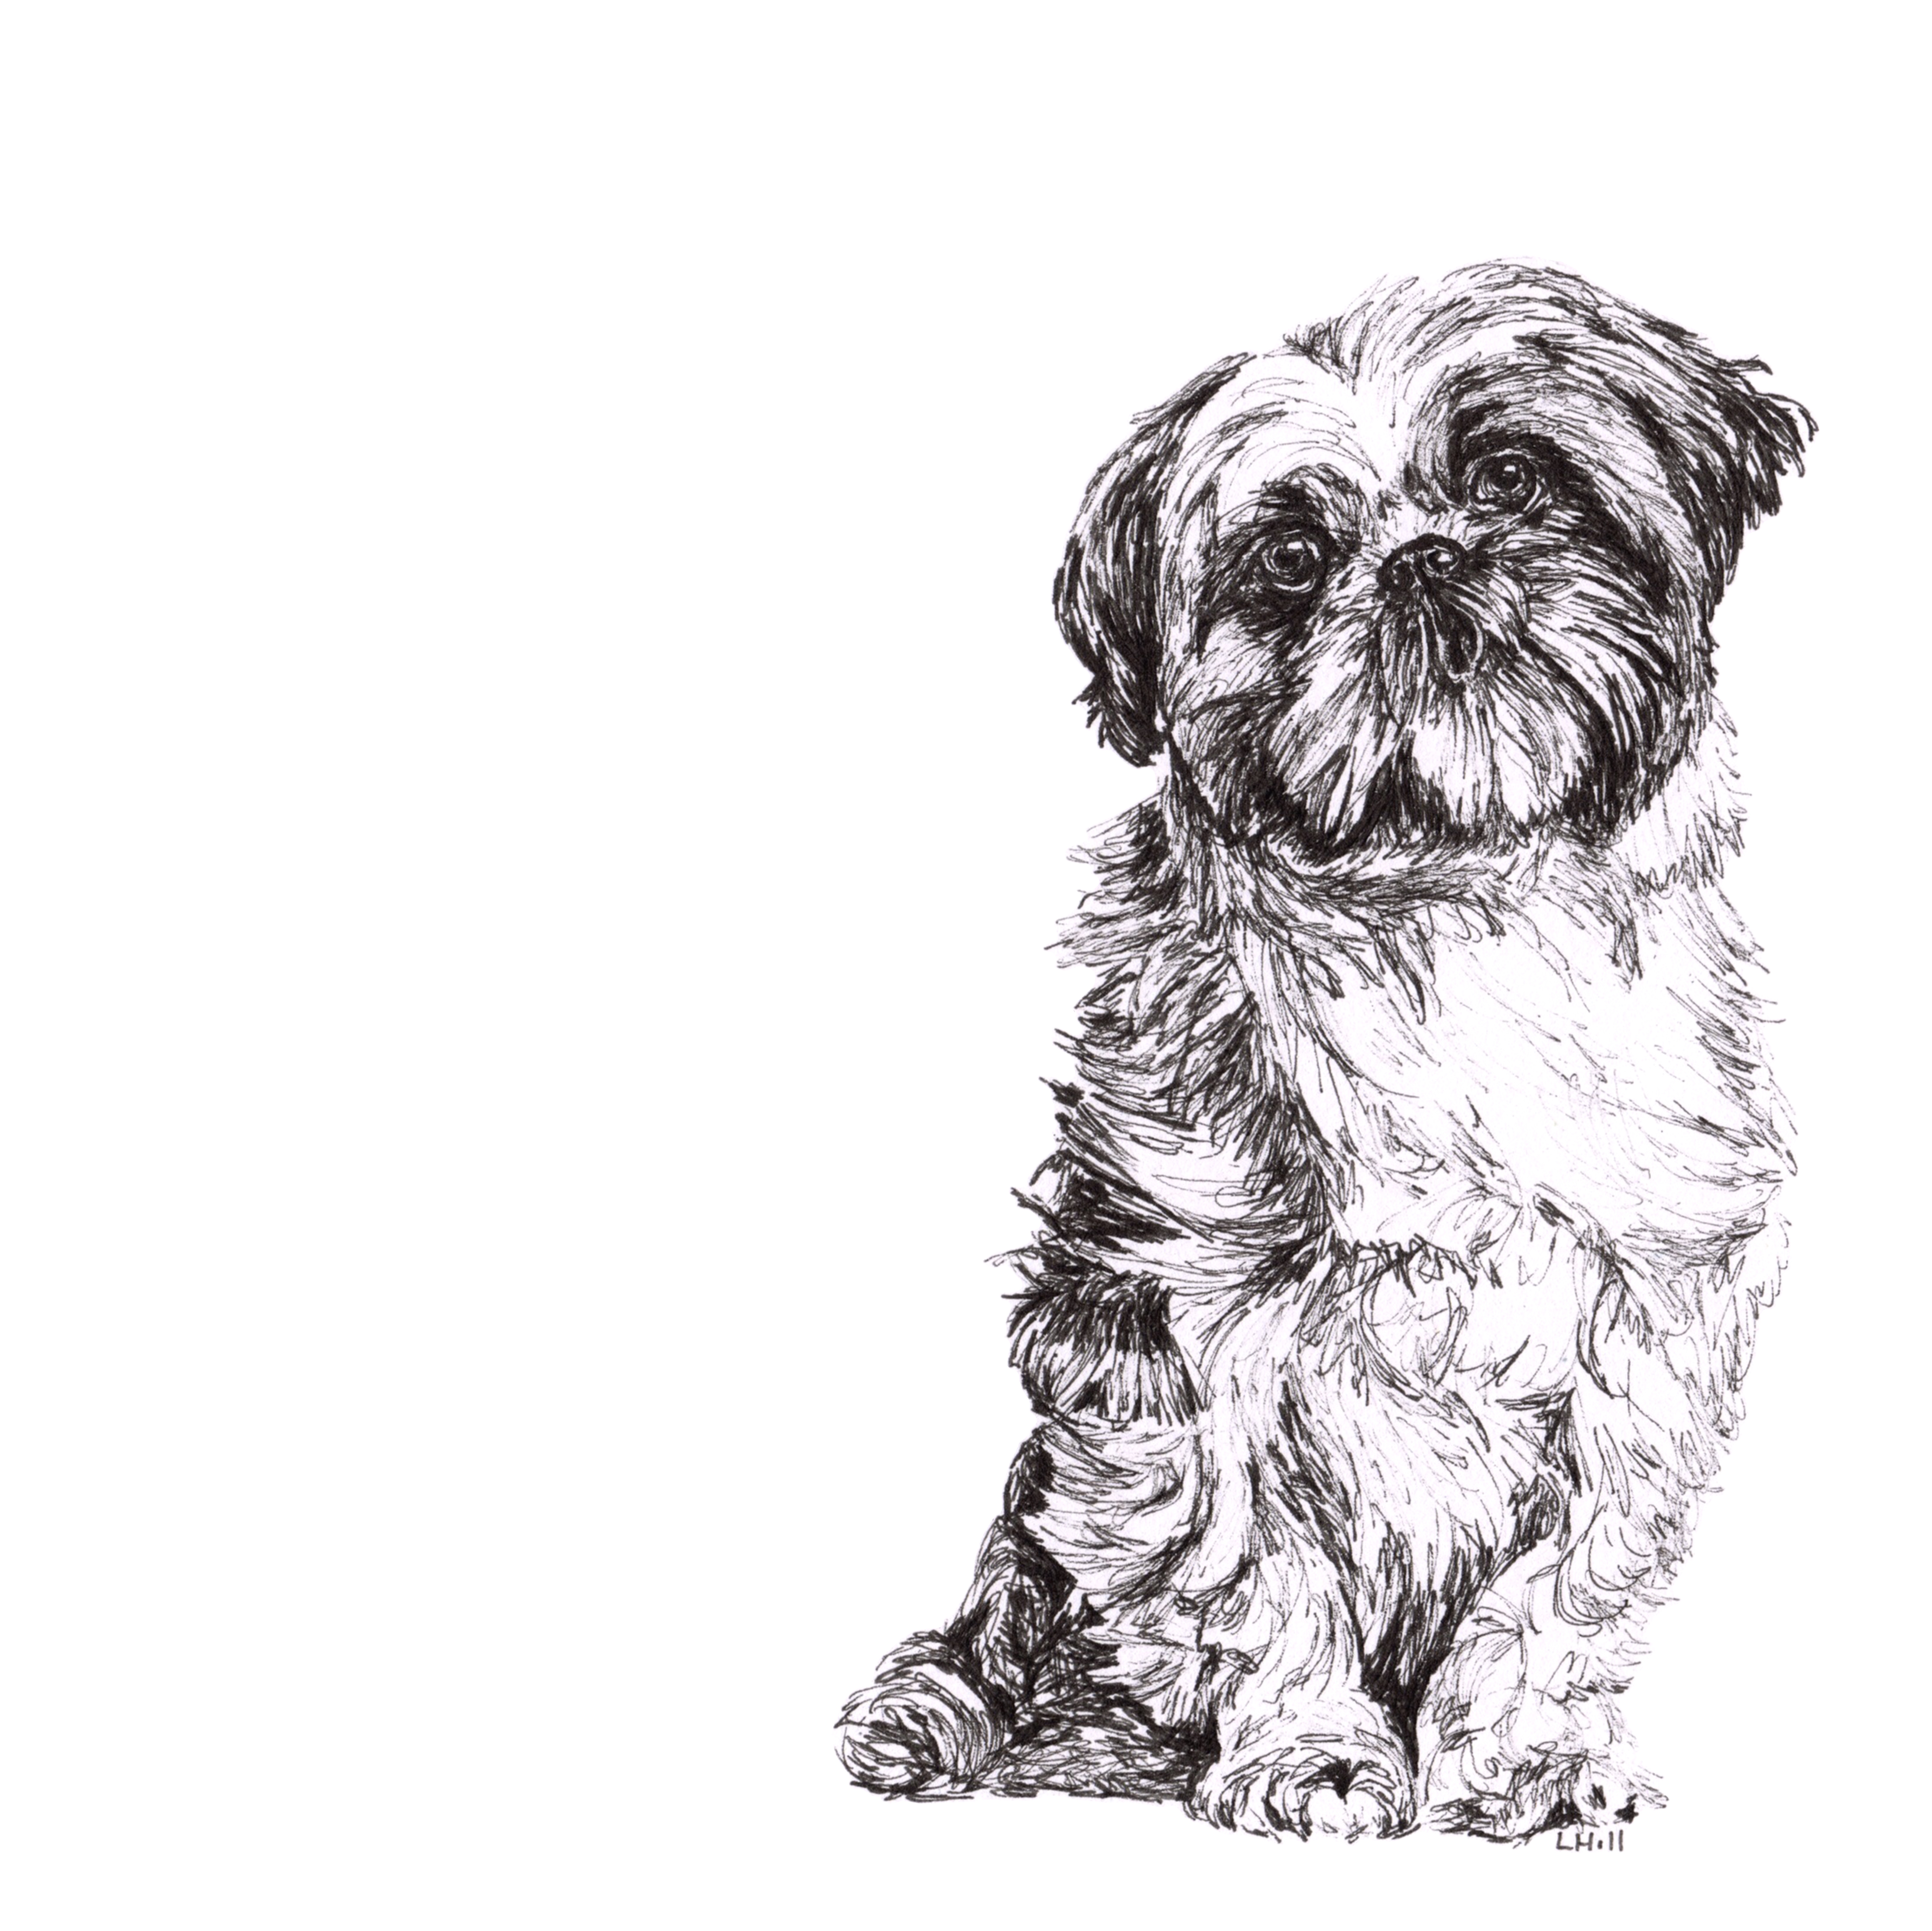 Shih Tzu pen and ink illustration by Louisa Hill